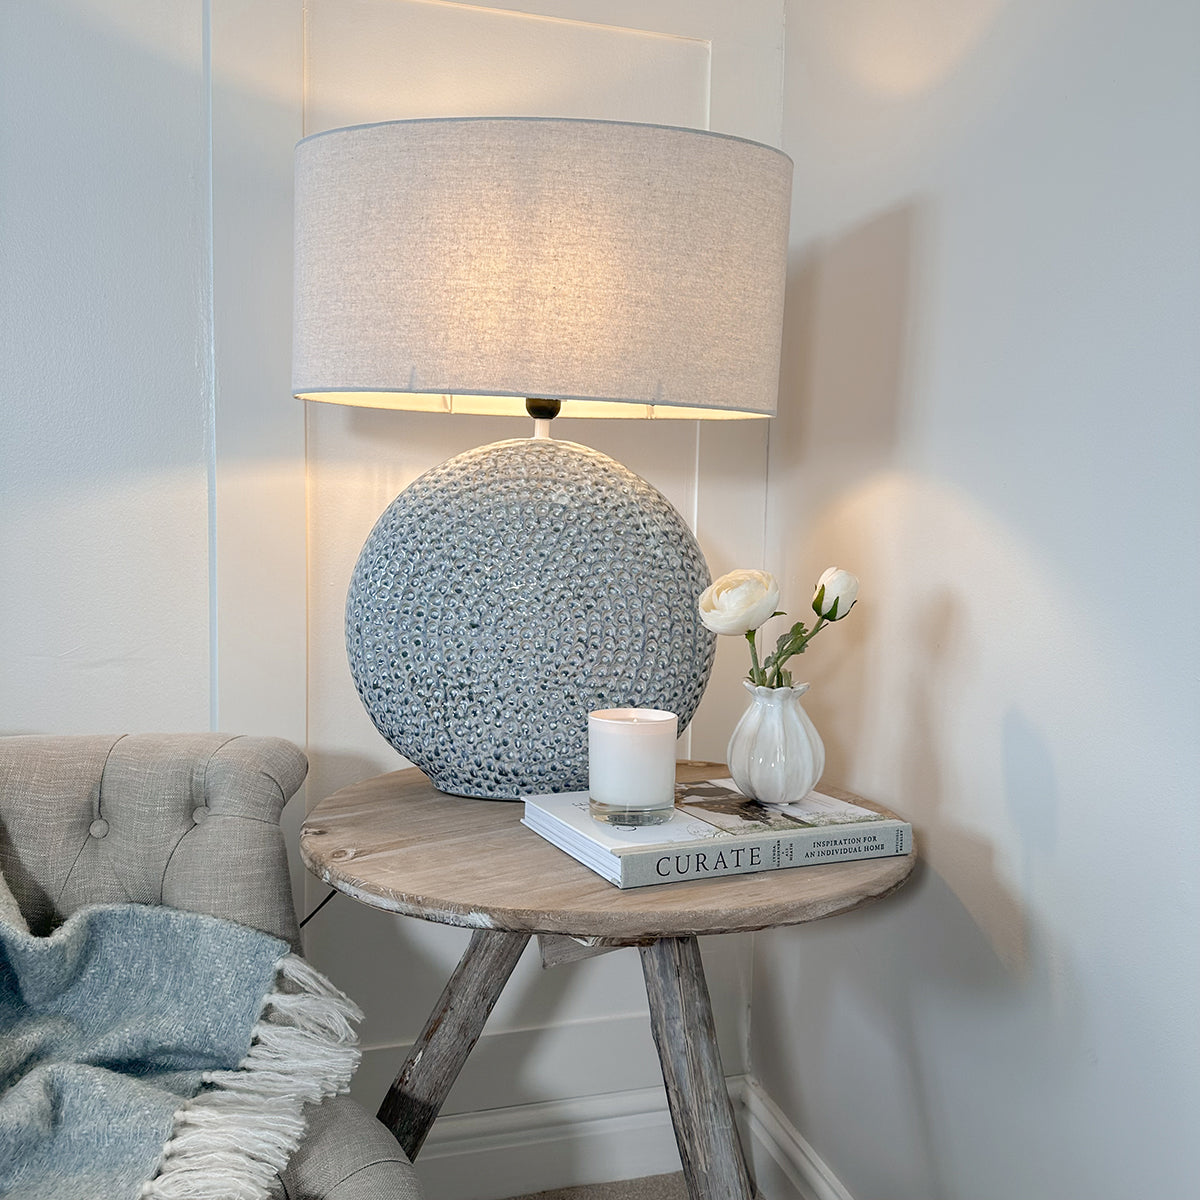 Textured Speckled Blue Lamp